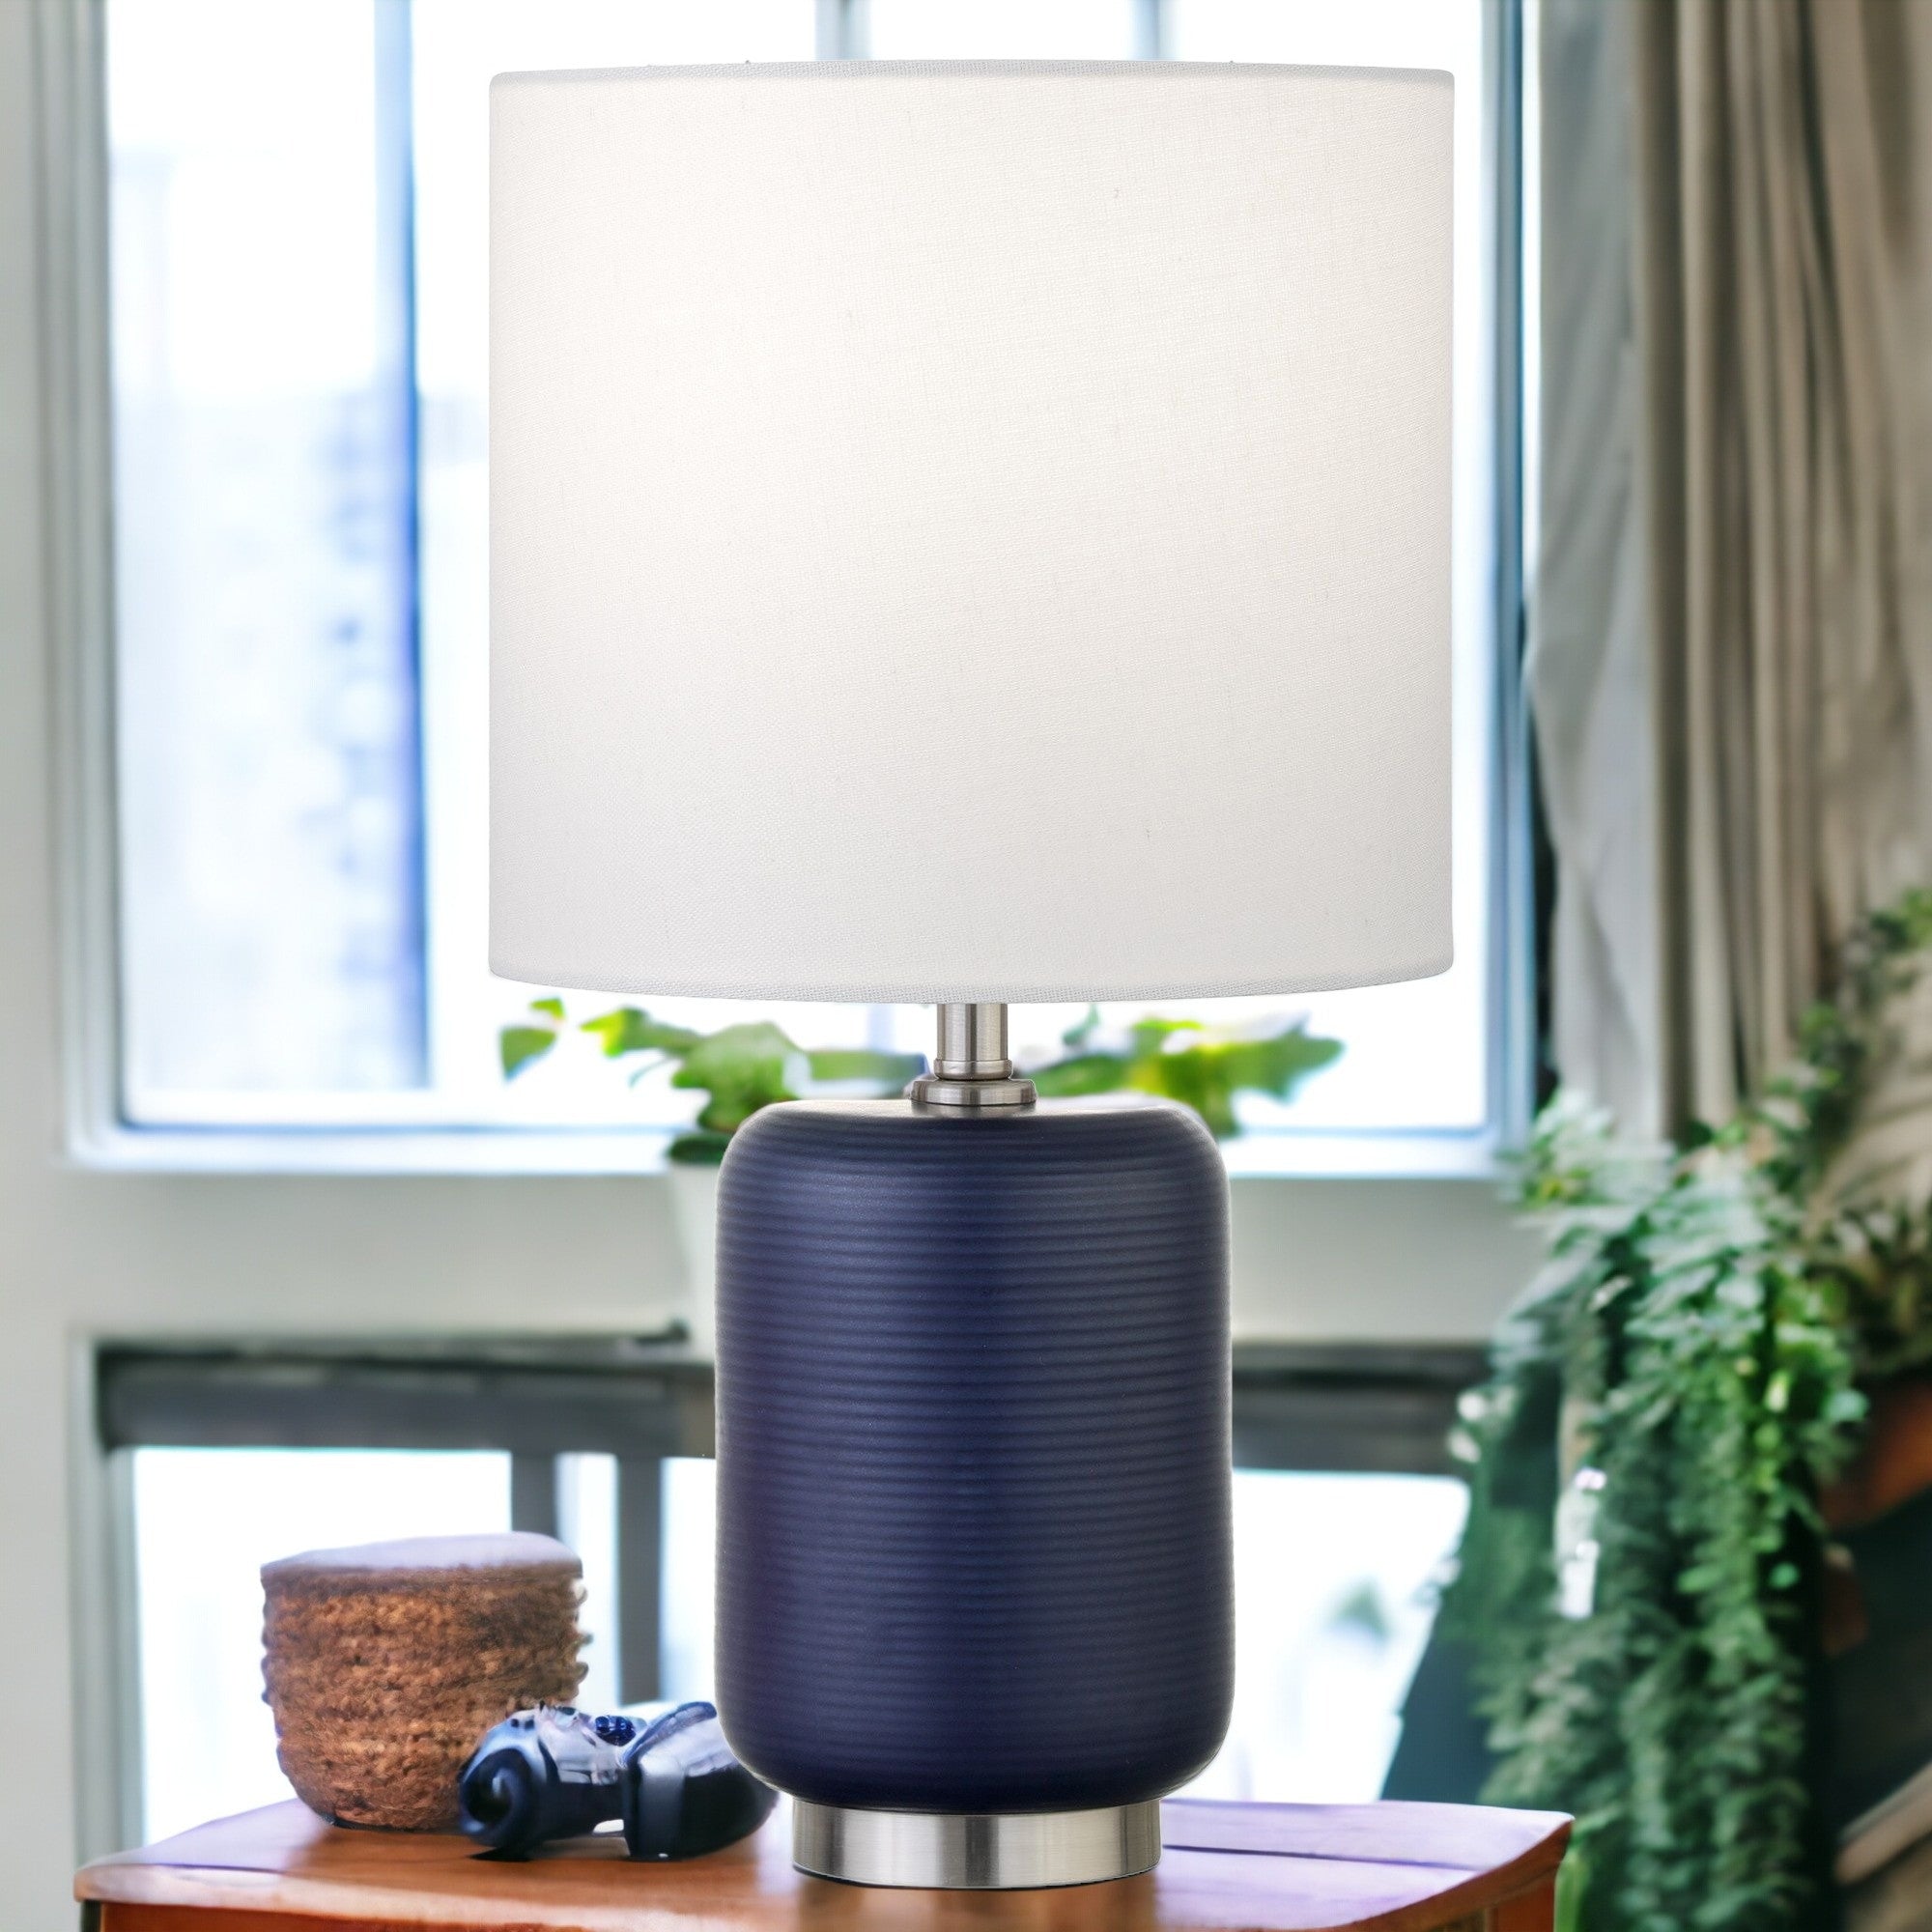 15" Blue and Silver Ceramic Cylinder Table Lamp With White Drum Shade